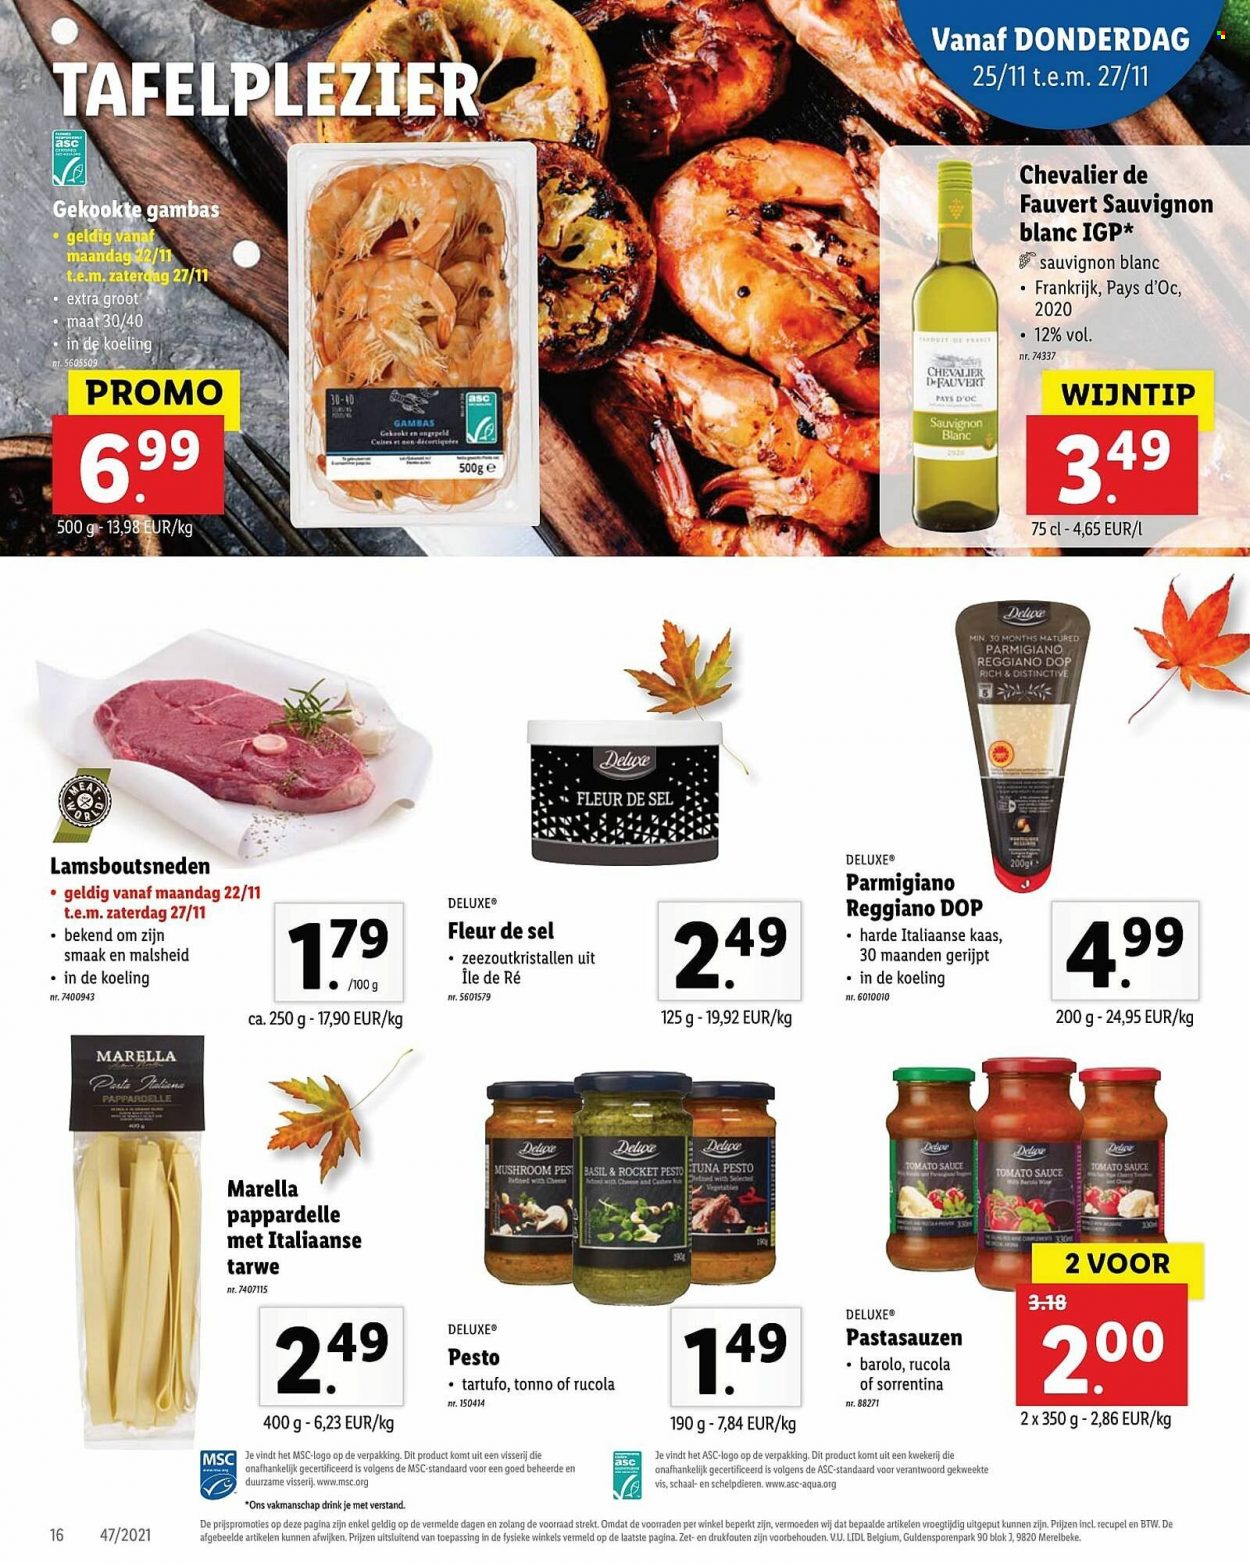 Catalogue Lidl - 22.11.2021 - 27.11.2021. Page 16.